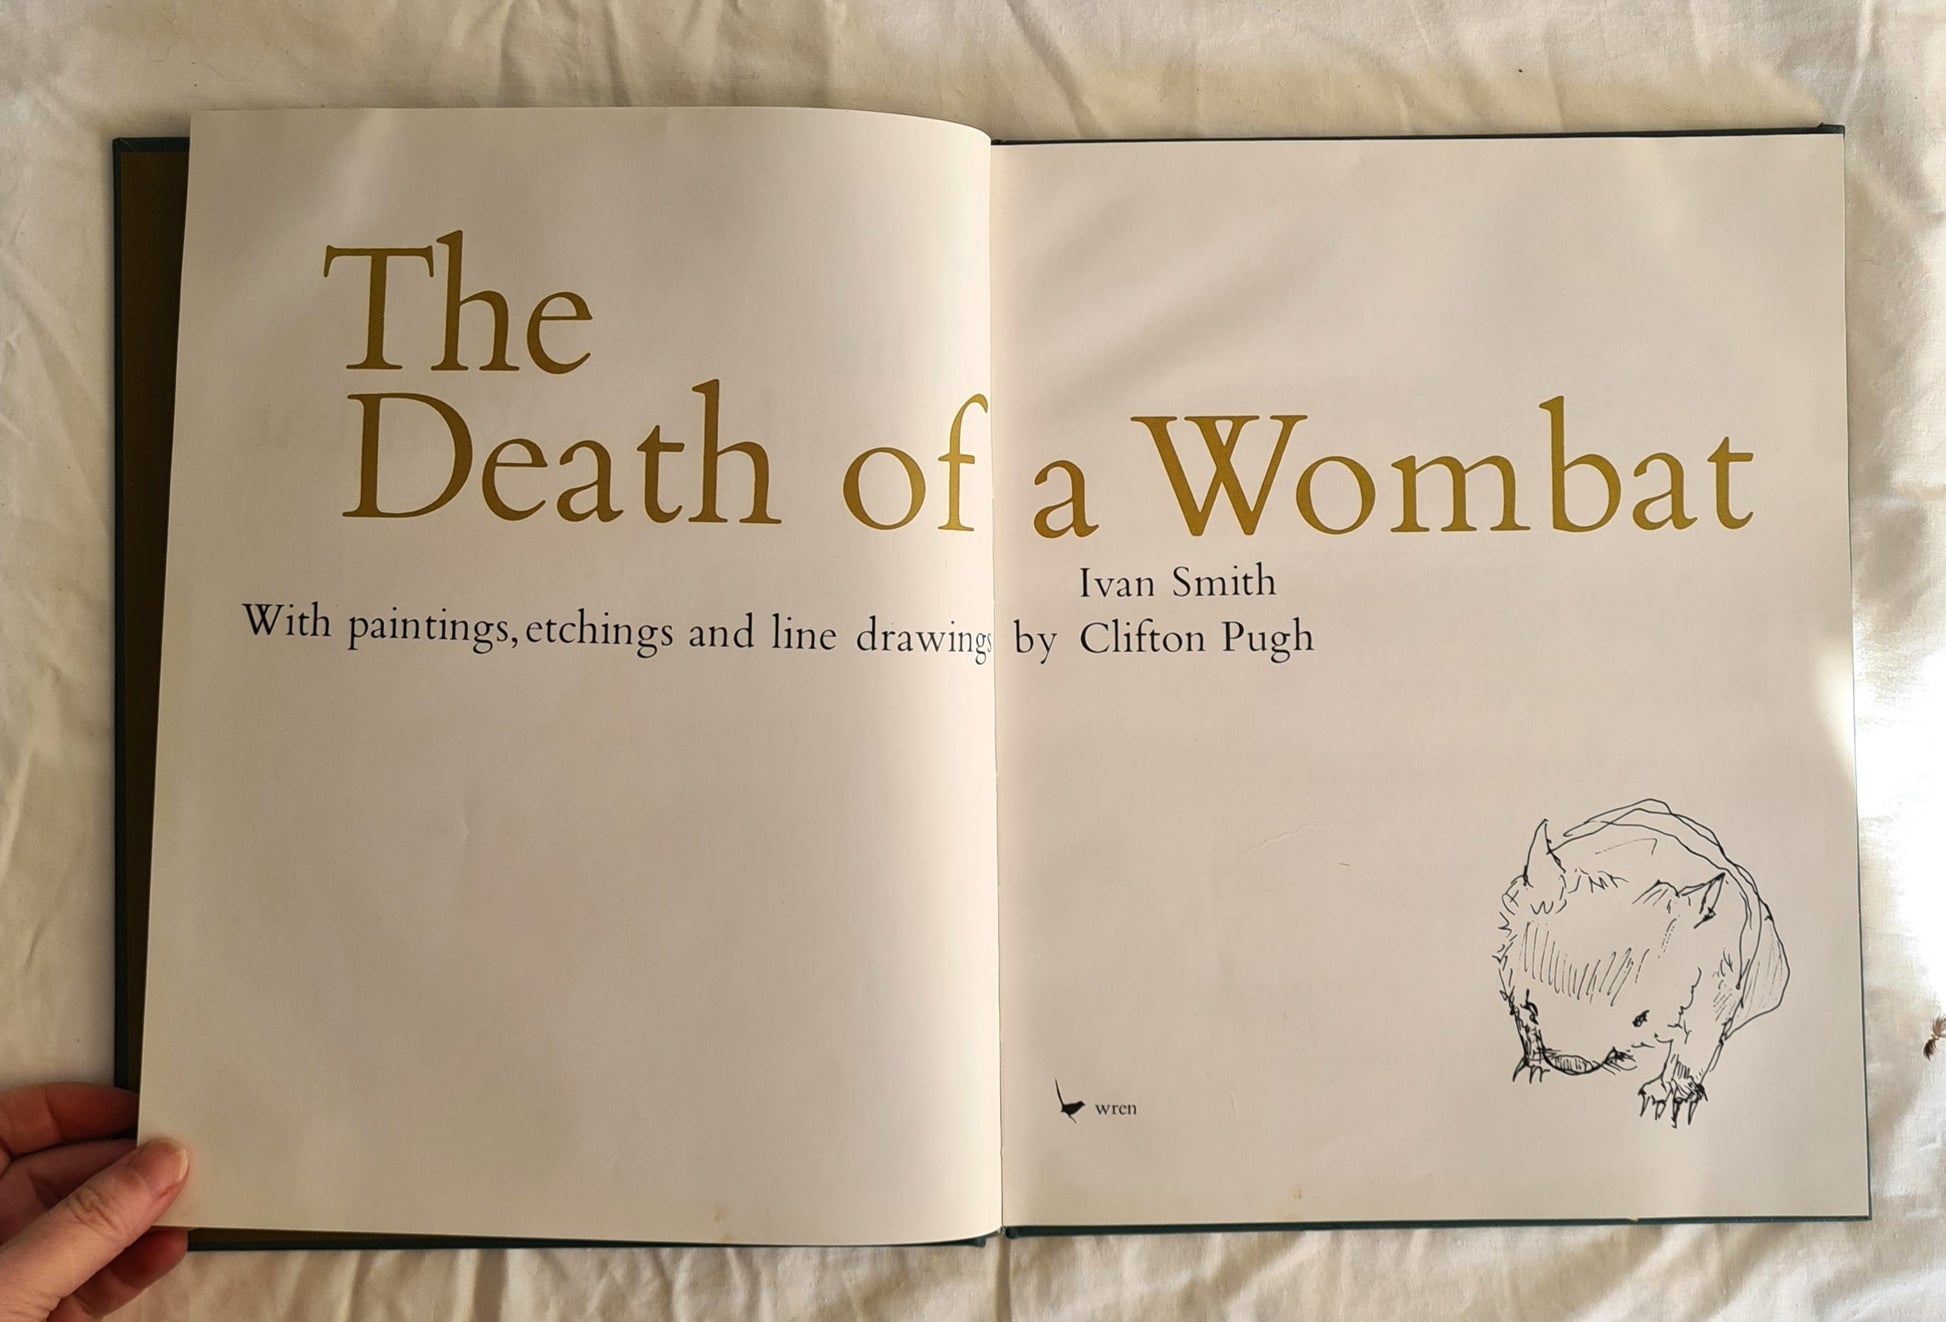 The Death of a Wombat  by Ivan Smith  With paintings, etchings and line drawings by Clifton Pugh